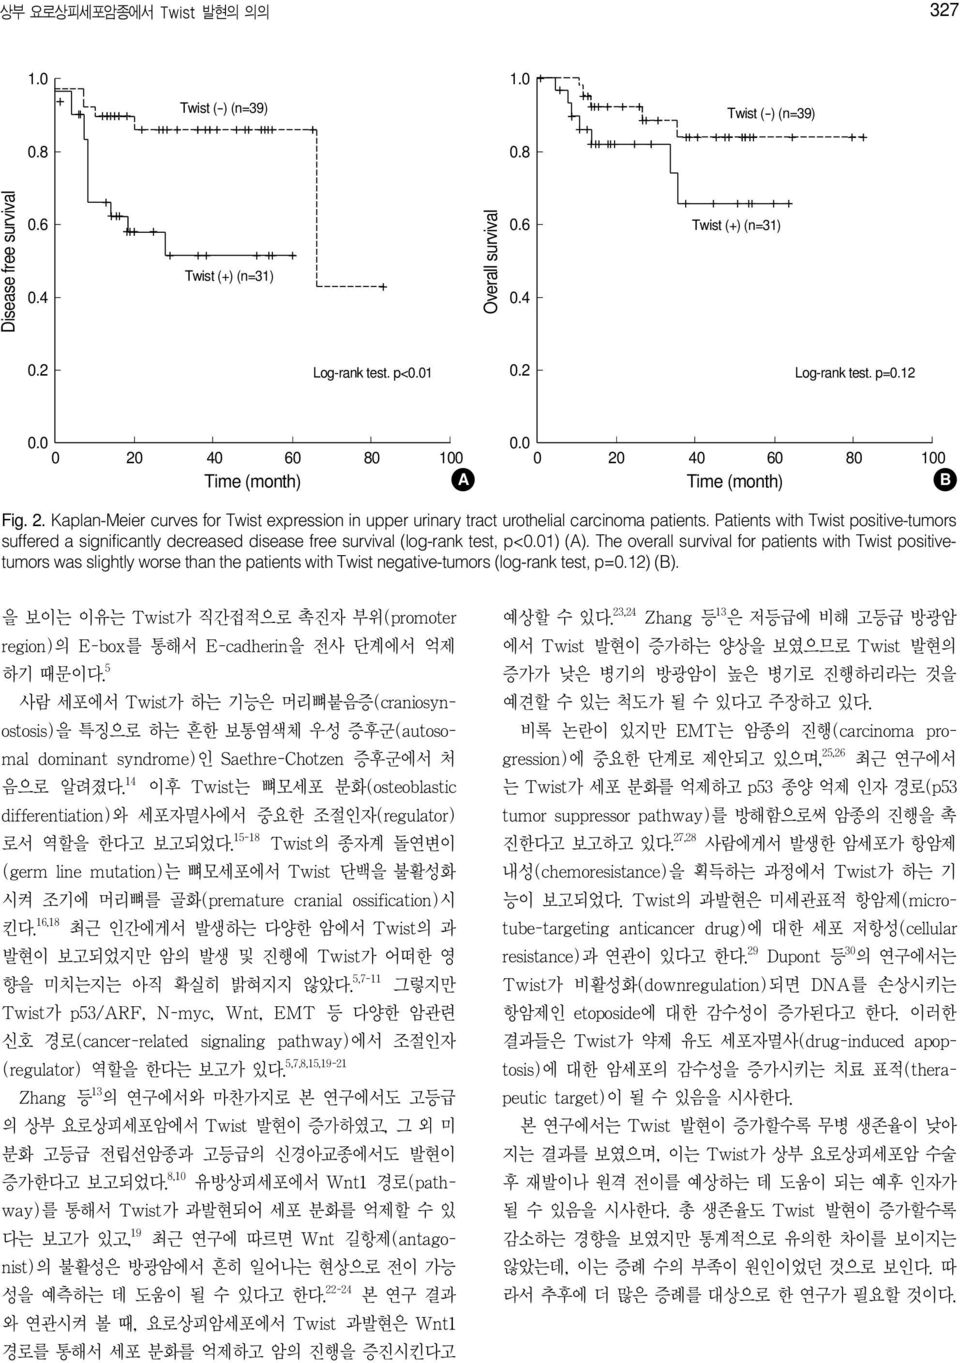 Patients with Twist positive-tumors suffered a significantly decreased disease free survival (log-rank test, p<0.01) (A).